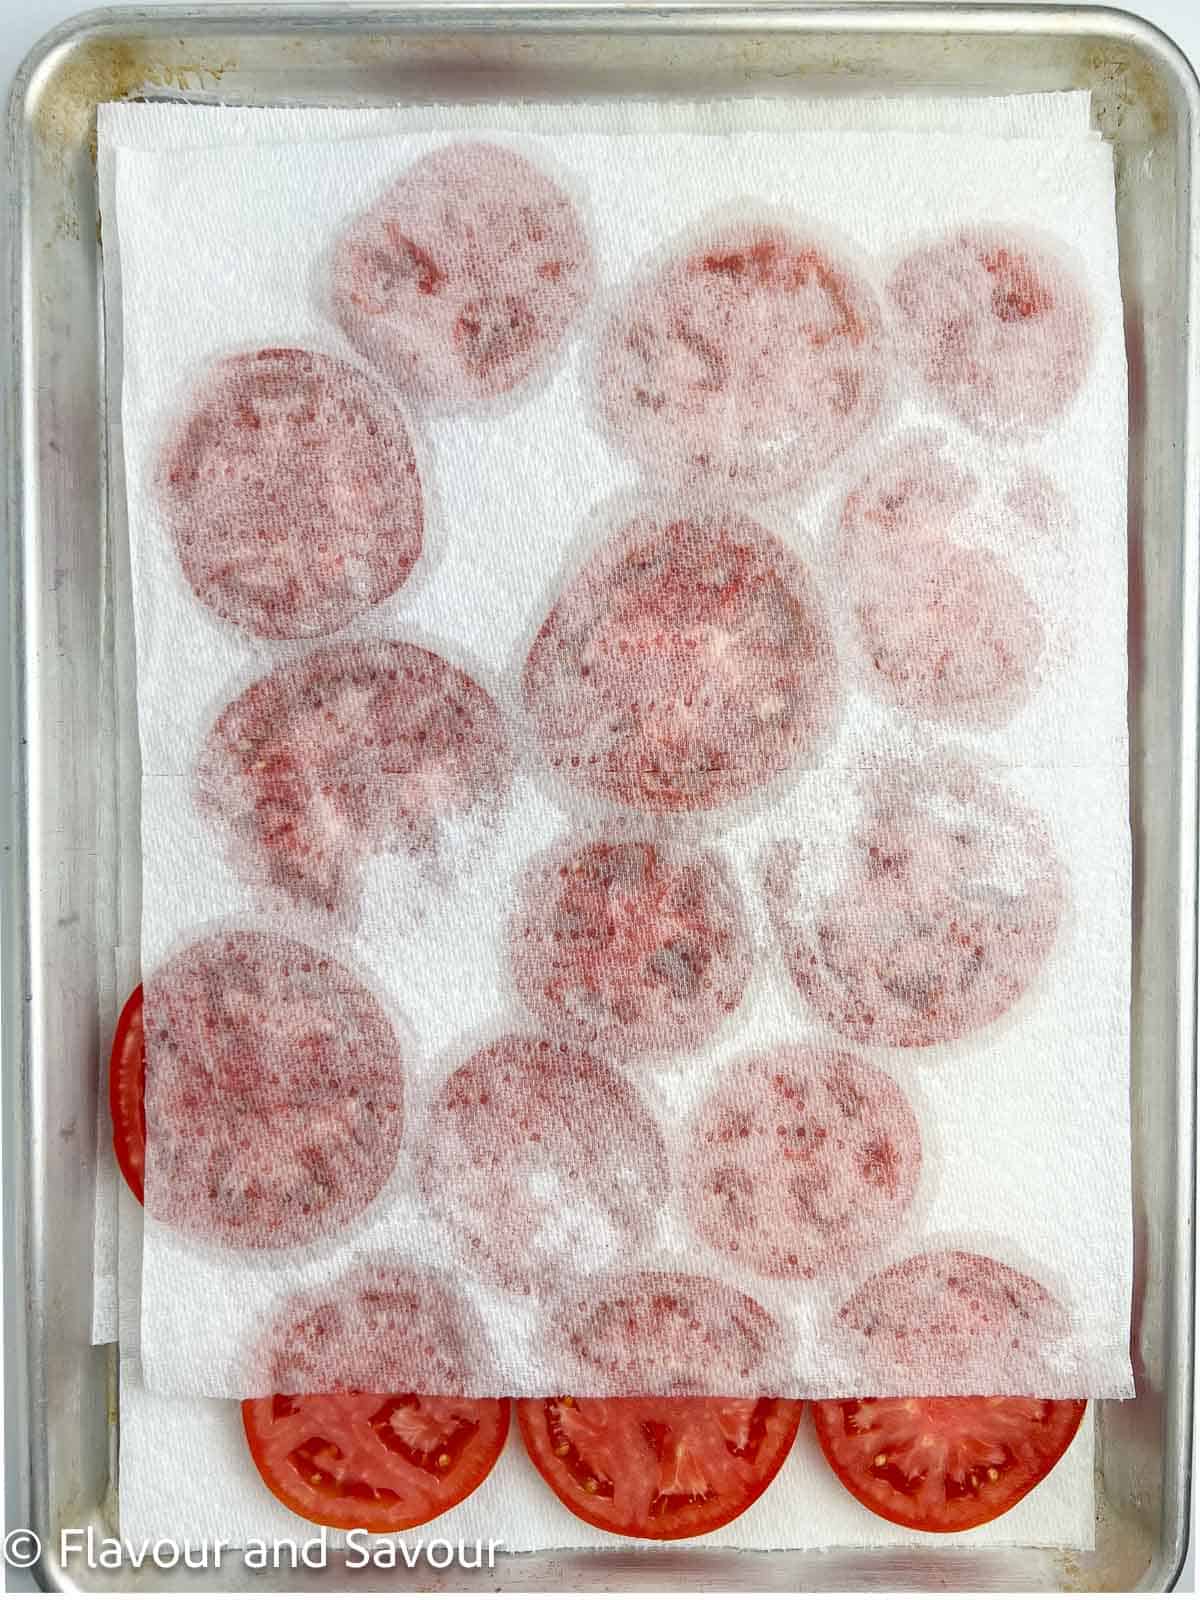 Paper towel on top of a baking sheet of sliced tomatoes.